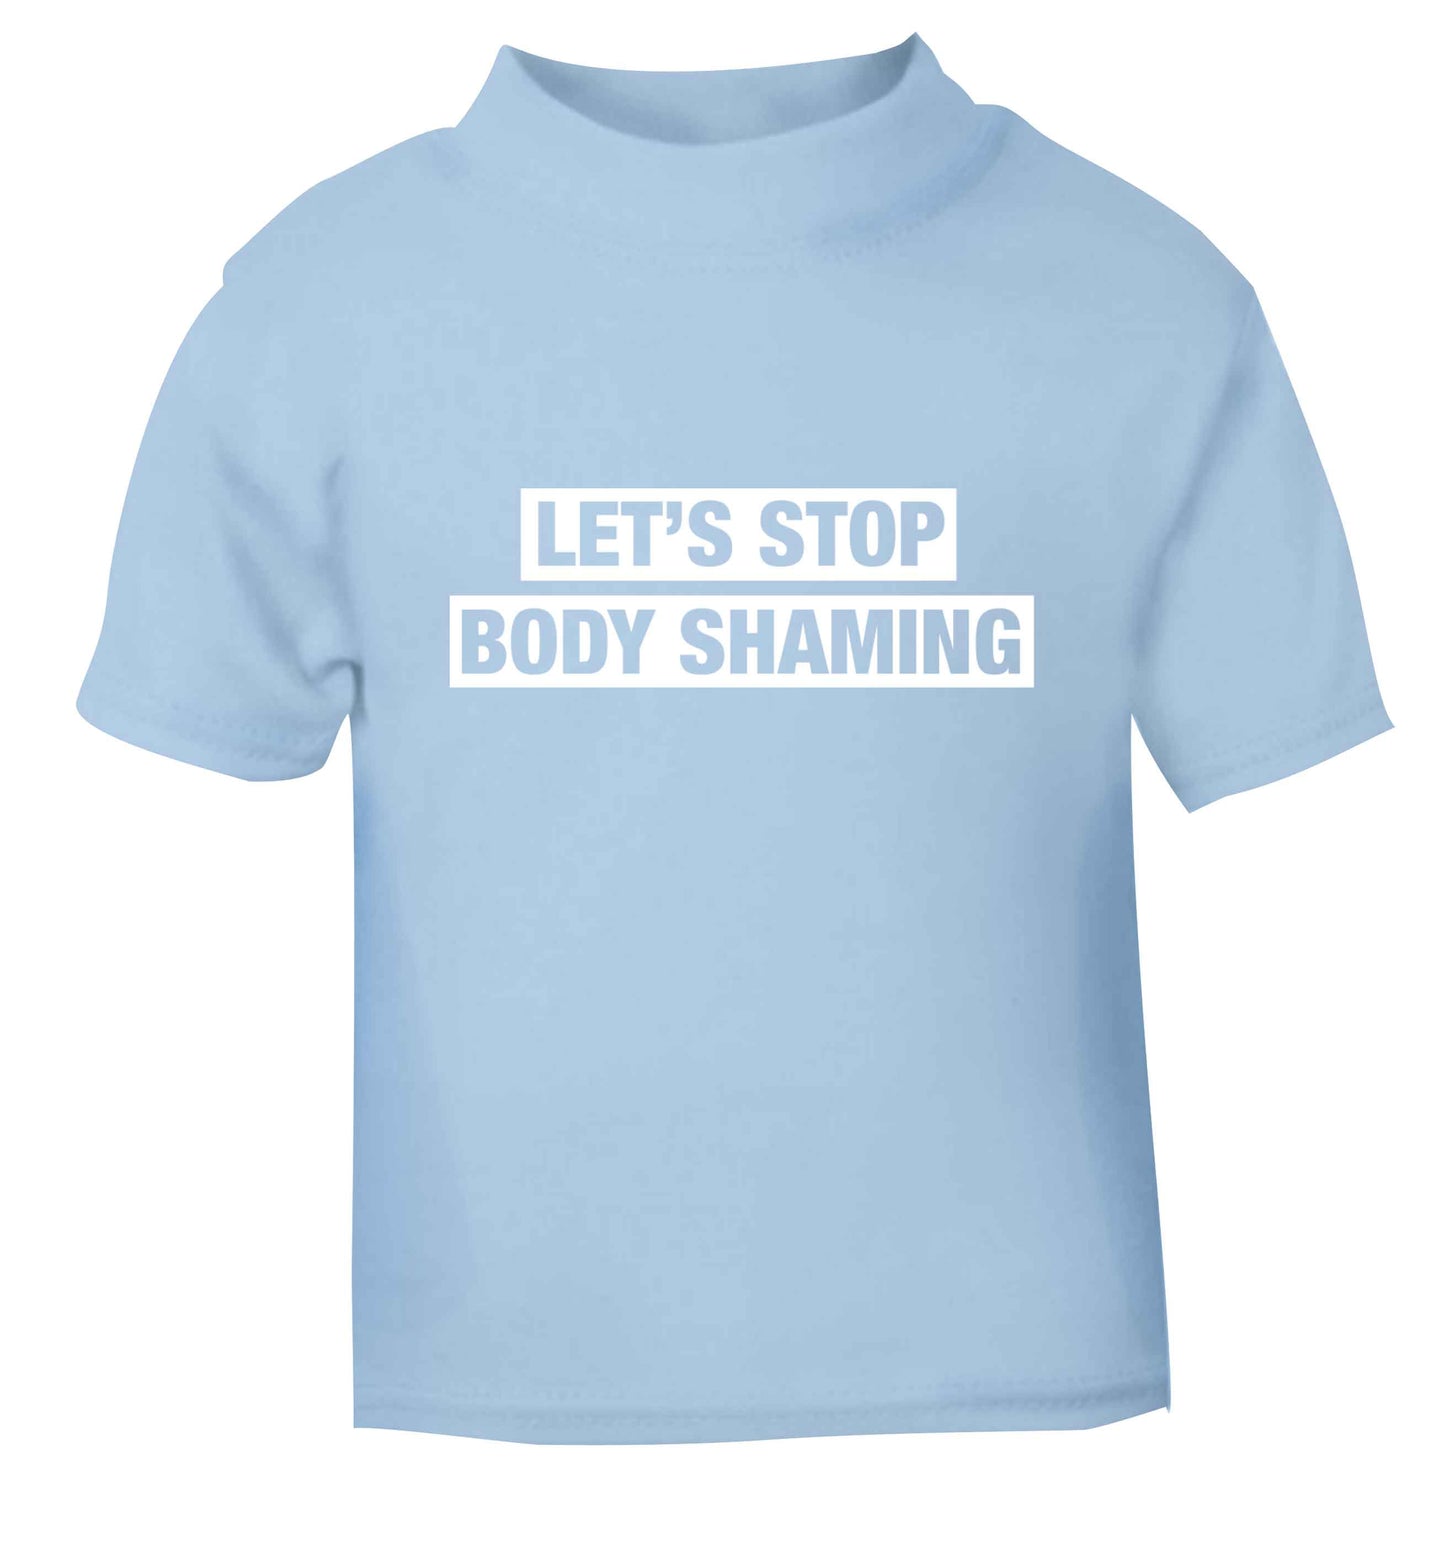 Let's stop body shaming light blue baby toddler Tshirt 2 Years